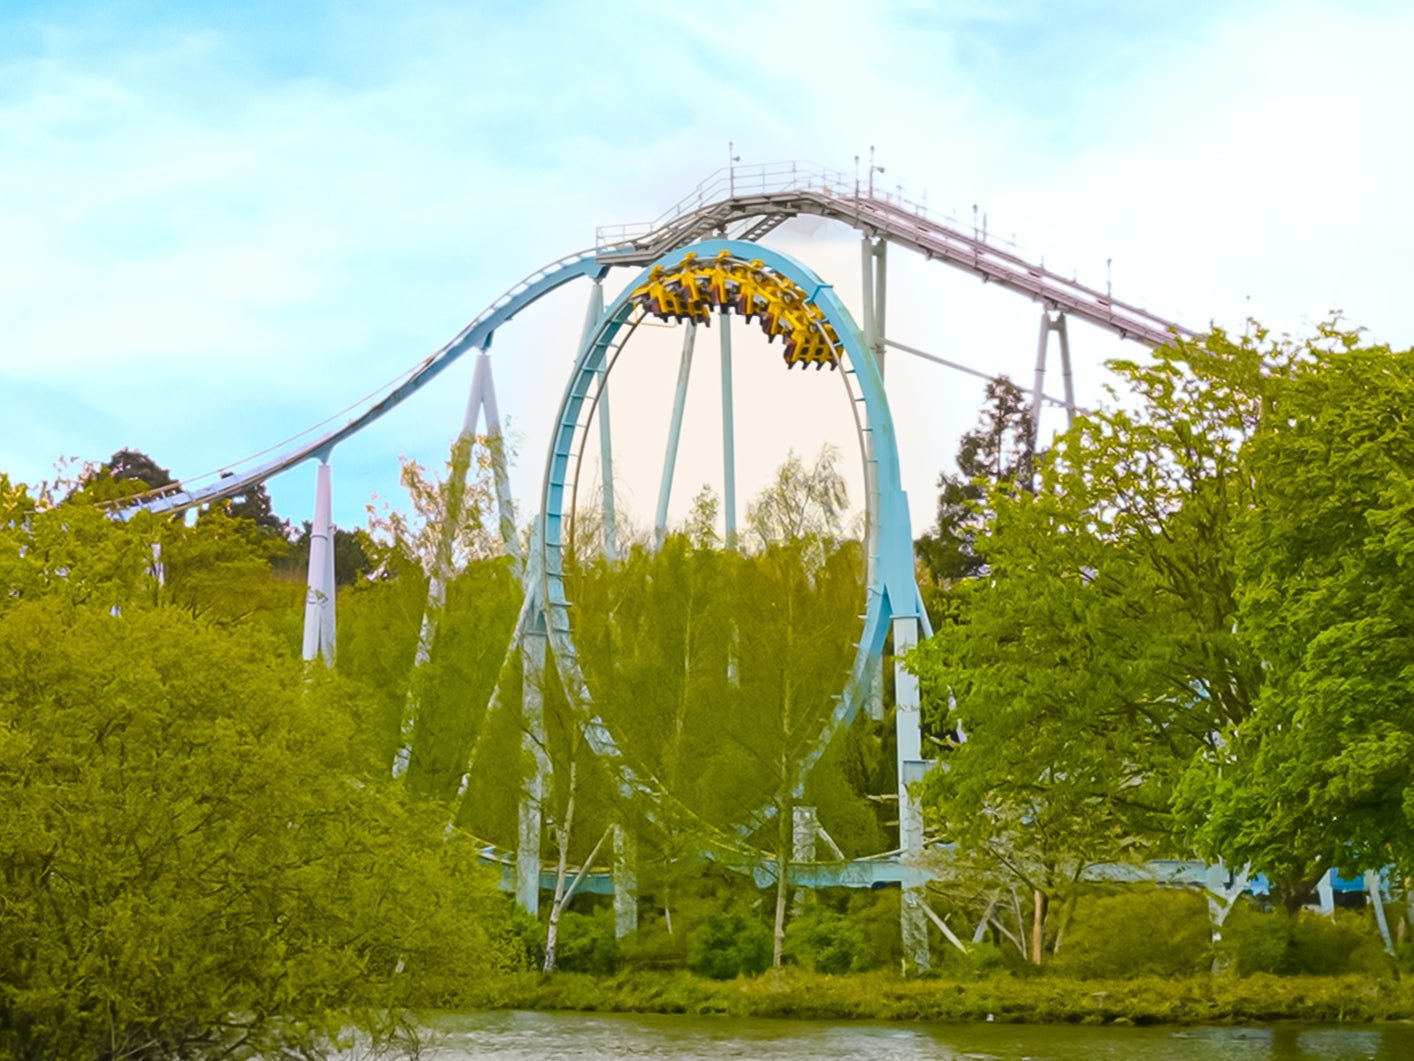 Head to Adventure Cove at Drayton Manor for a ride on The Wave